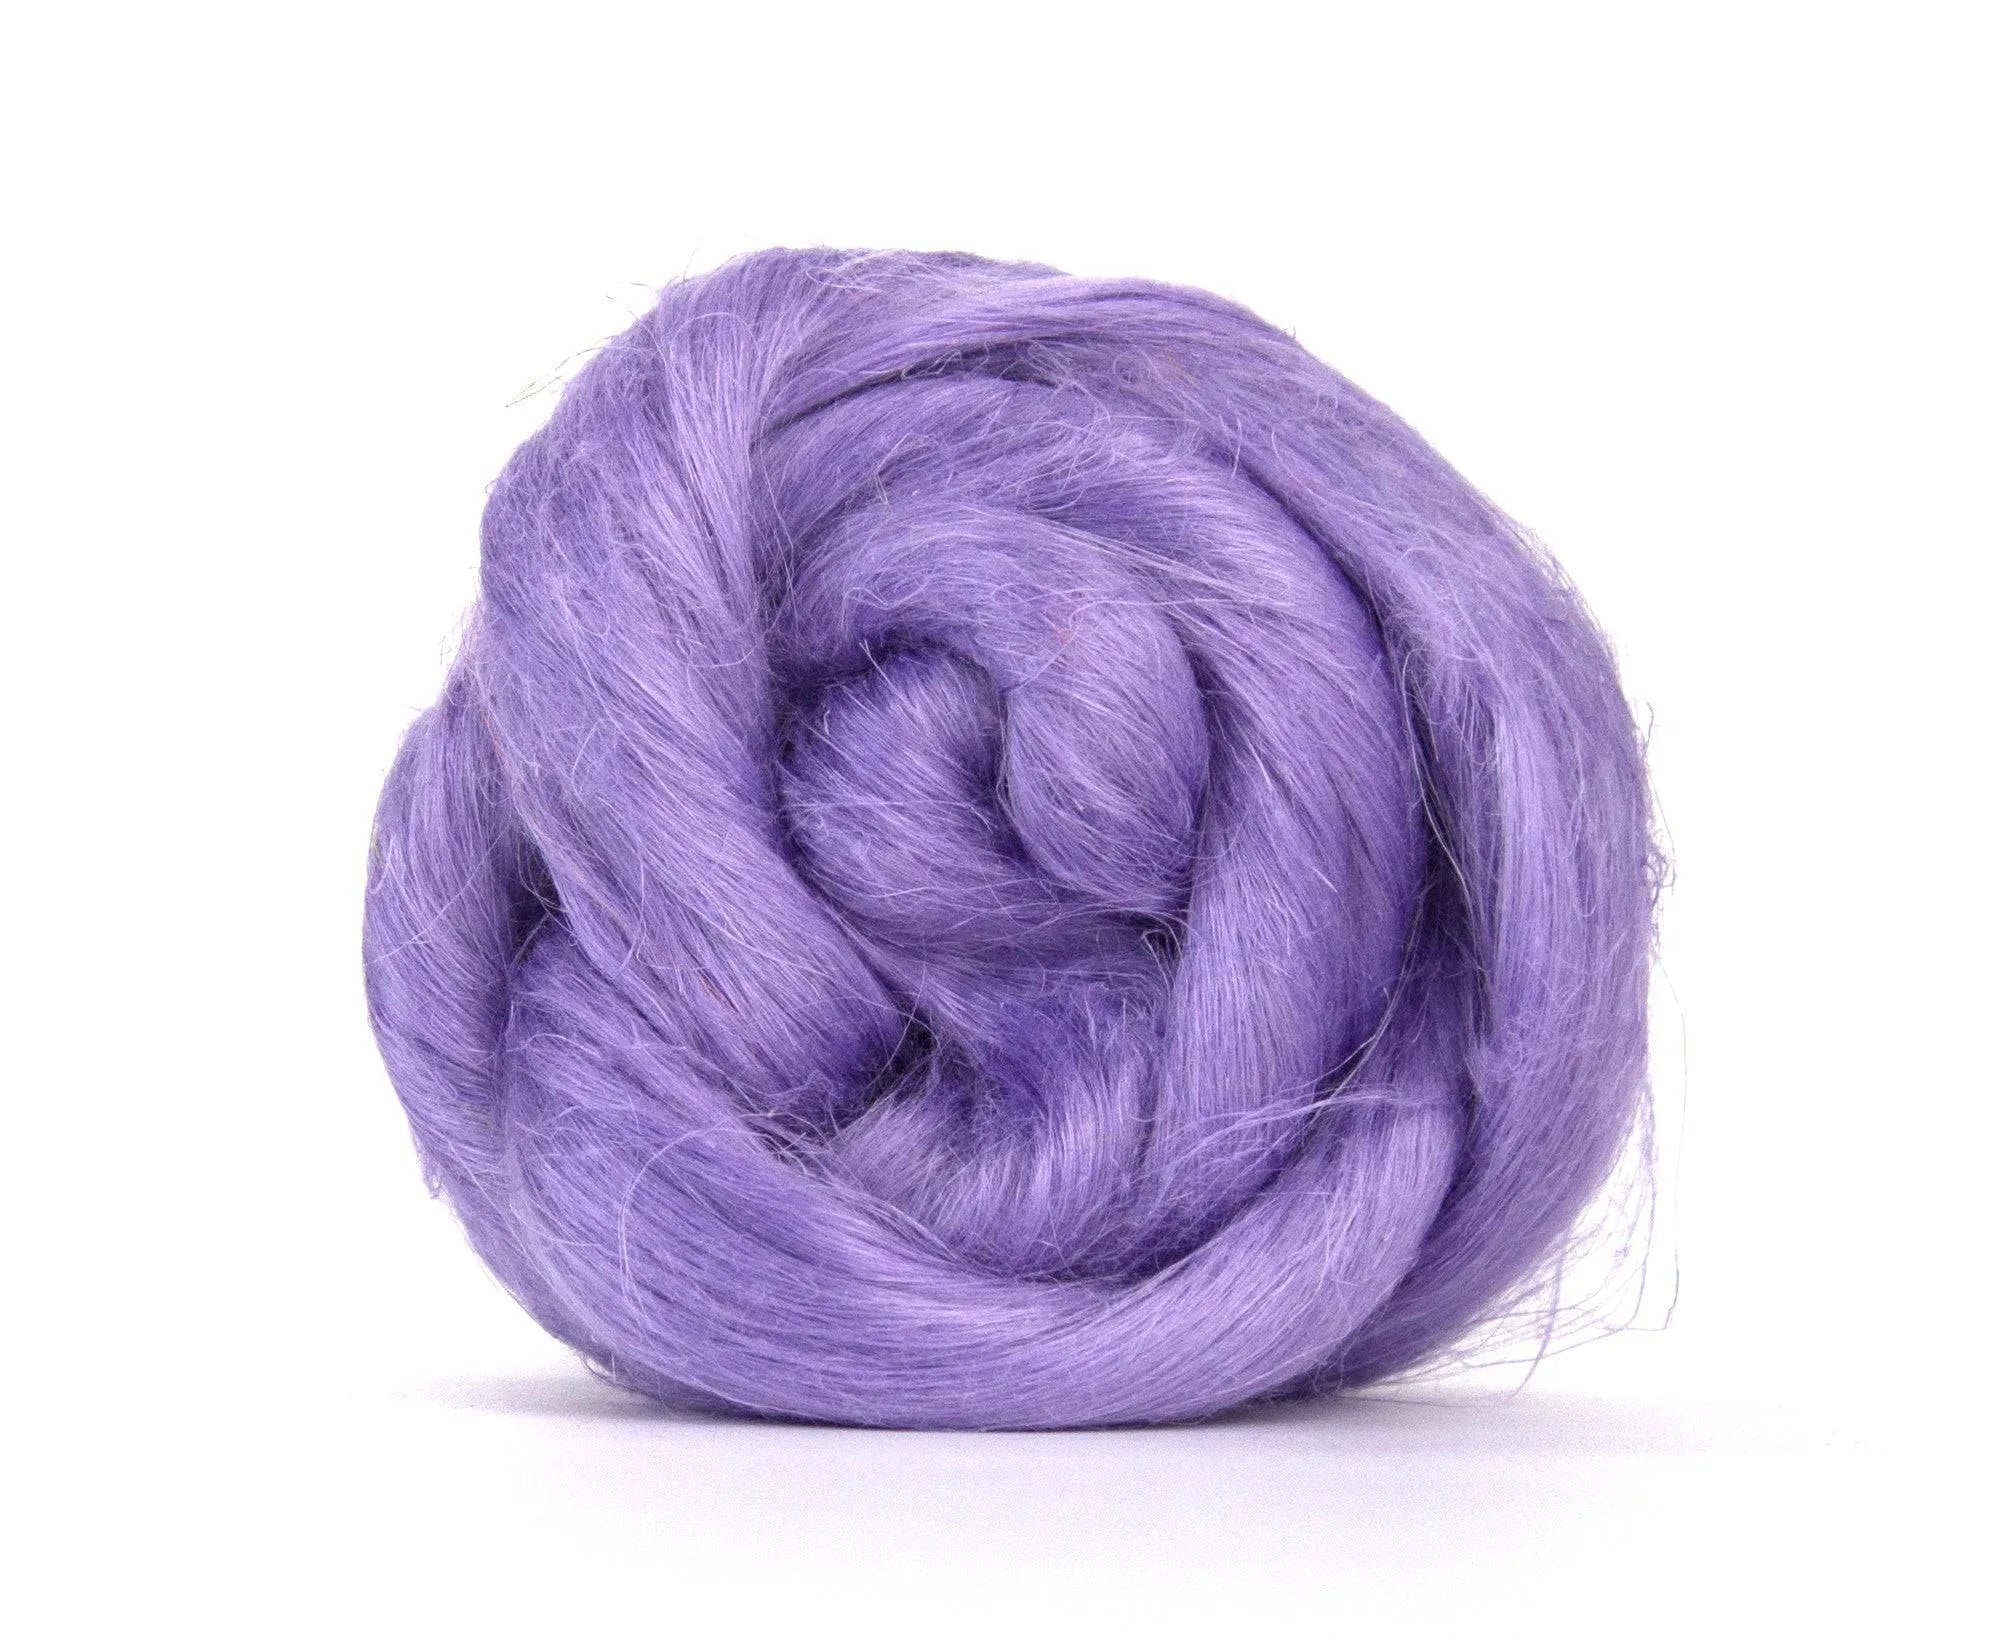 Lilac Flax/Linen Top - World of Wool